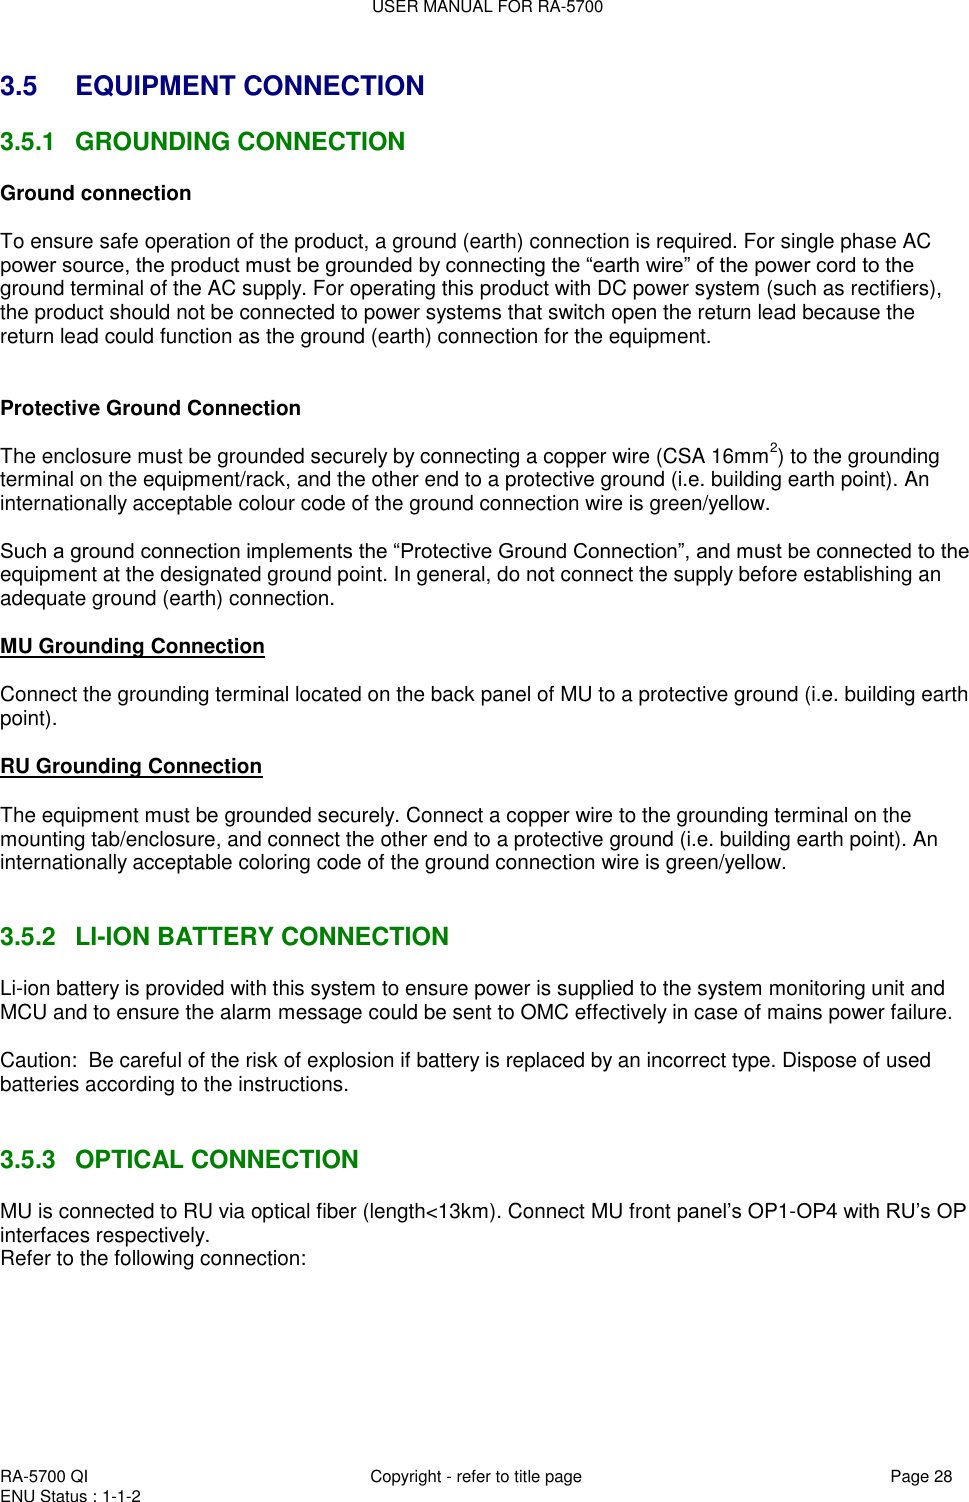 USER MANUAL FOR RA-5700  RA-5700 QI  Copyright - refer to title page Page 28 ENU Status : 1-1-2    3.5 EQUIPMENT CONNECTION 3.5.1  GROUNDING CONNECTION Ground connection  To ensure safe operation of the product, a ground (earth) connection is required. For single phase AC power source, the product must be grounded by connecting the “earth wire” of the power cord to the ground terminal of the AC supply. For operating this product with DC power system (such as rectifiers), the product should not be connected to power systems that switch open the return lead because the return lead could function as the ground (earth) connection for the equipment.    Protective Ground Connection  The enclosure must be grounded securely by connecting a copper wire (CSA 16mm2) to the grounding terminal on the equipment/rack, and the other end to a protective ground (i.e. building earth point). An internationally acceptable colour code of the ground connection wire is green/yellow.   Such a ground connection implements the “Protective Ground Connection”, and must be connected to the equipment at the designated ground point. In general, do not connect the supply before establishing an adequate ground (earth) connection.  MU Grounding Connection   Connect the grounding terminal located on the back panel of MU to a protective ground (i.e. building earth point).   RU Grounding Connection  The equipment must be grounded securely. Connect a copper wire to the grounding terminal on the mounting tab/enclosure, and connect the other end to a protective ground (i.e. building earth point). An internationally acceptable coloring code of the ground connection wire is green/yellow.   3.5.2  LI-ION BATTERY CONNECTION Li-ion battery is provided with this system to ensure power is supplied to the system monitoring unit and MCU and to ensure the alarm message could be sent to OMC effectively in case of mains power failure.  Caution:  Be careful of the risk of explosion if battery is replaced by an incorrect type. Dispose of used batteries according to the instructions.    3.5.3  OPTICAL CONNECTION  MU is connected to RU via optical fiber (length&lt;13km). Connect MU front panel‟s OP1-OP4 with RU‟s OP interfaces respectively.  Refer to the following connection:  